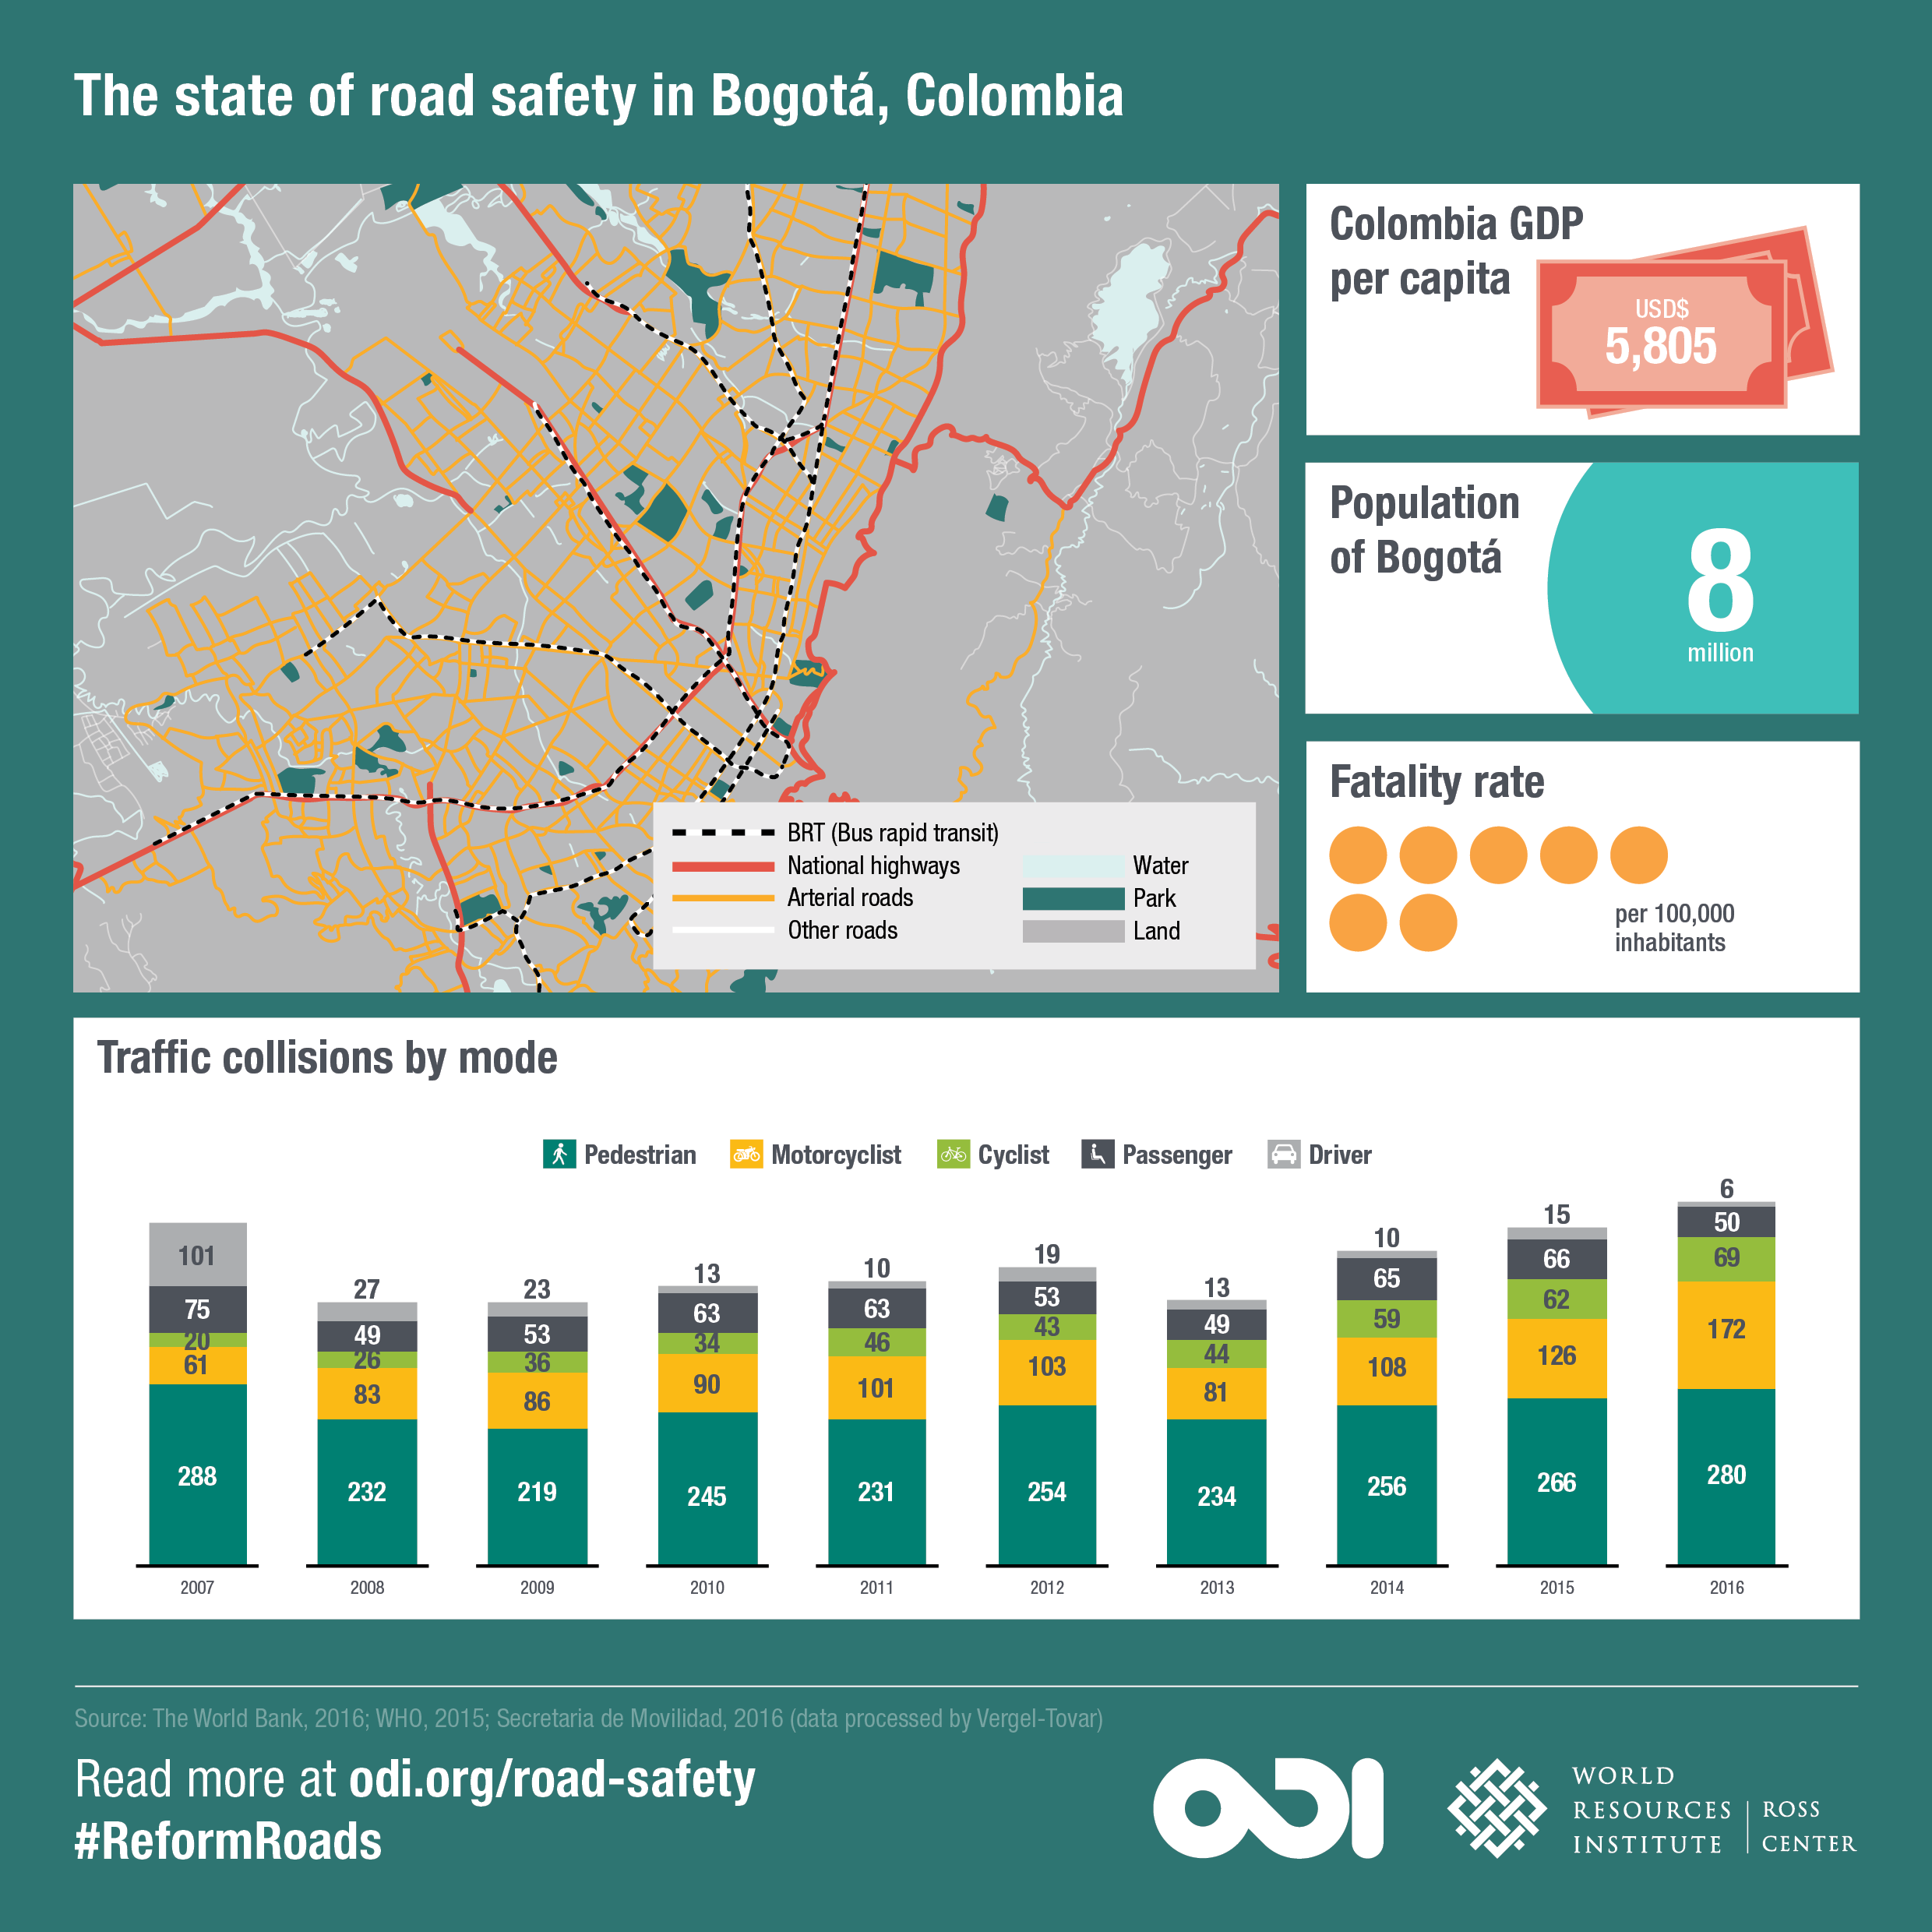 The state of road safety in Bogotá. Image: ODI and WRI